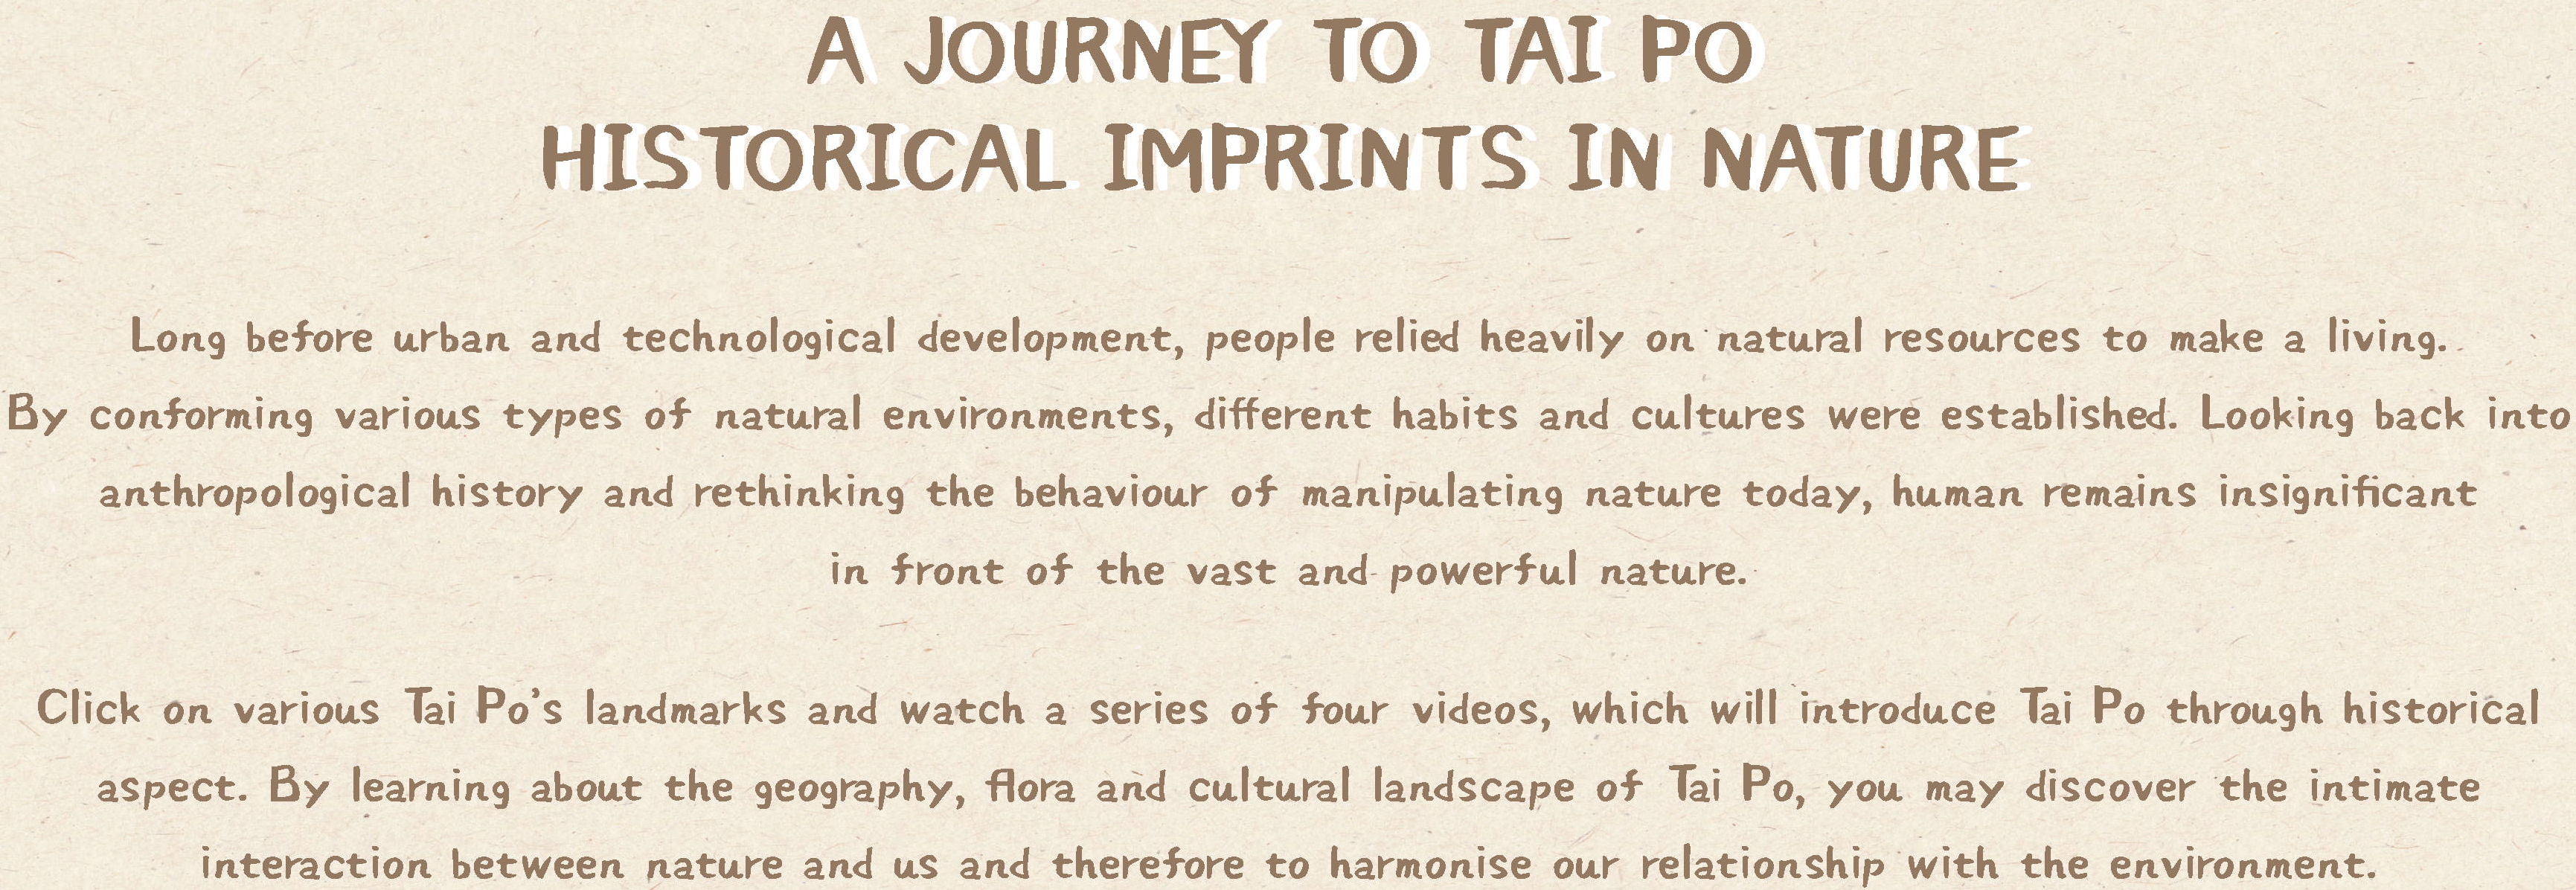 A Journey to Tai Po: Historical Imprints in Nature